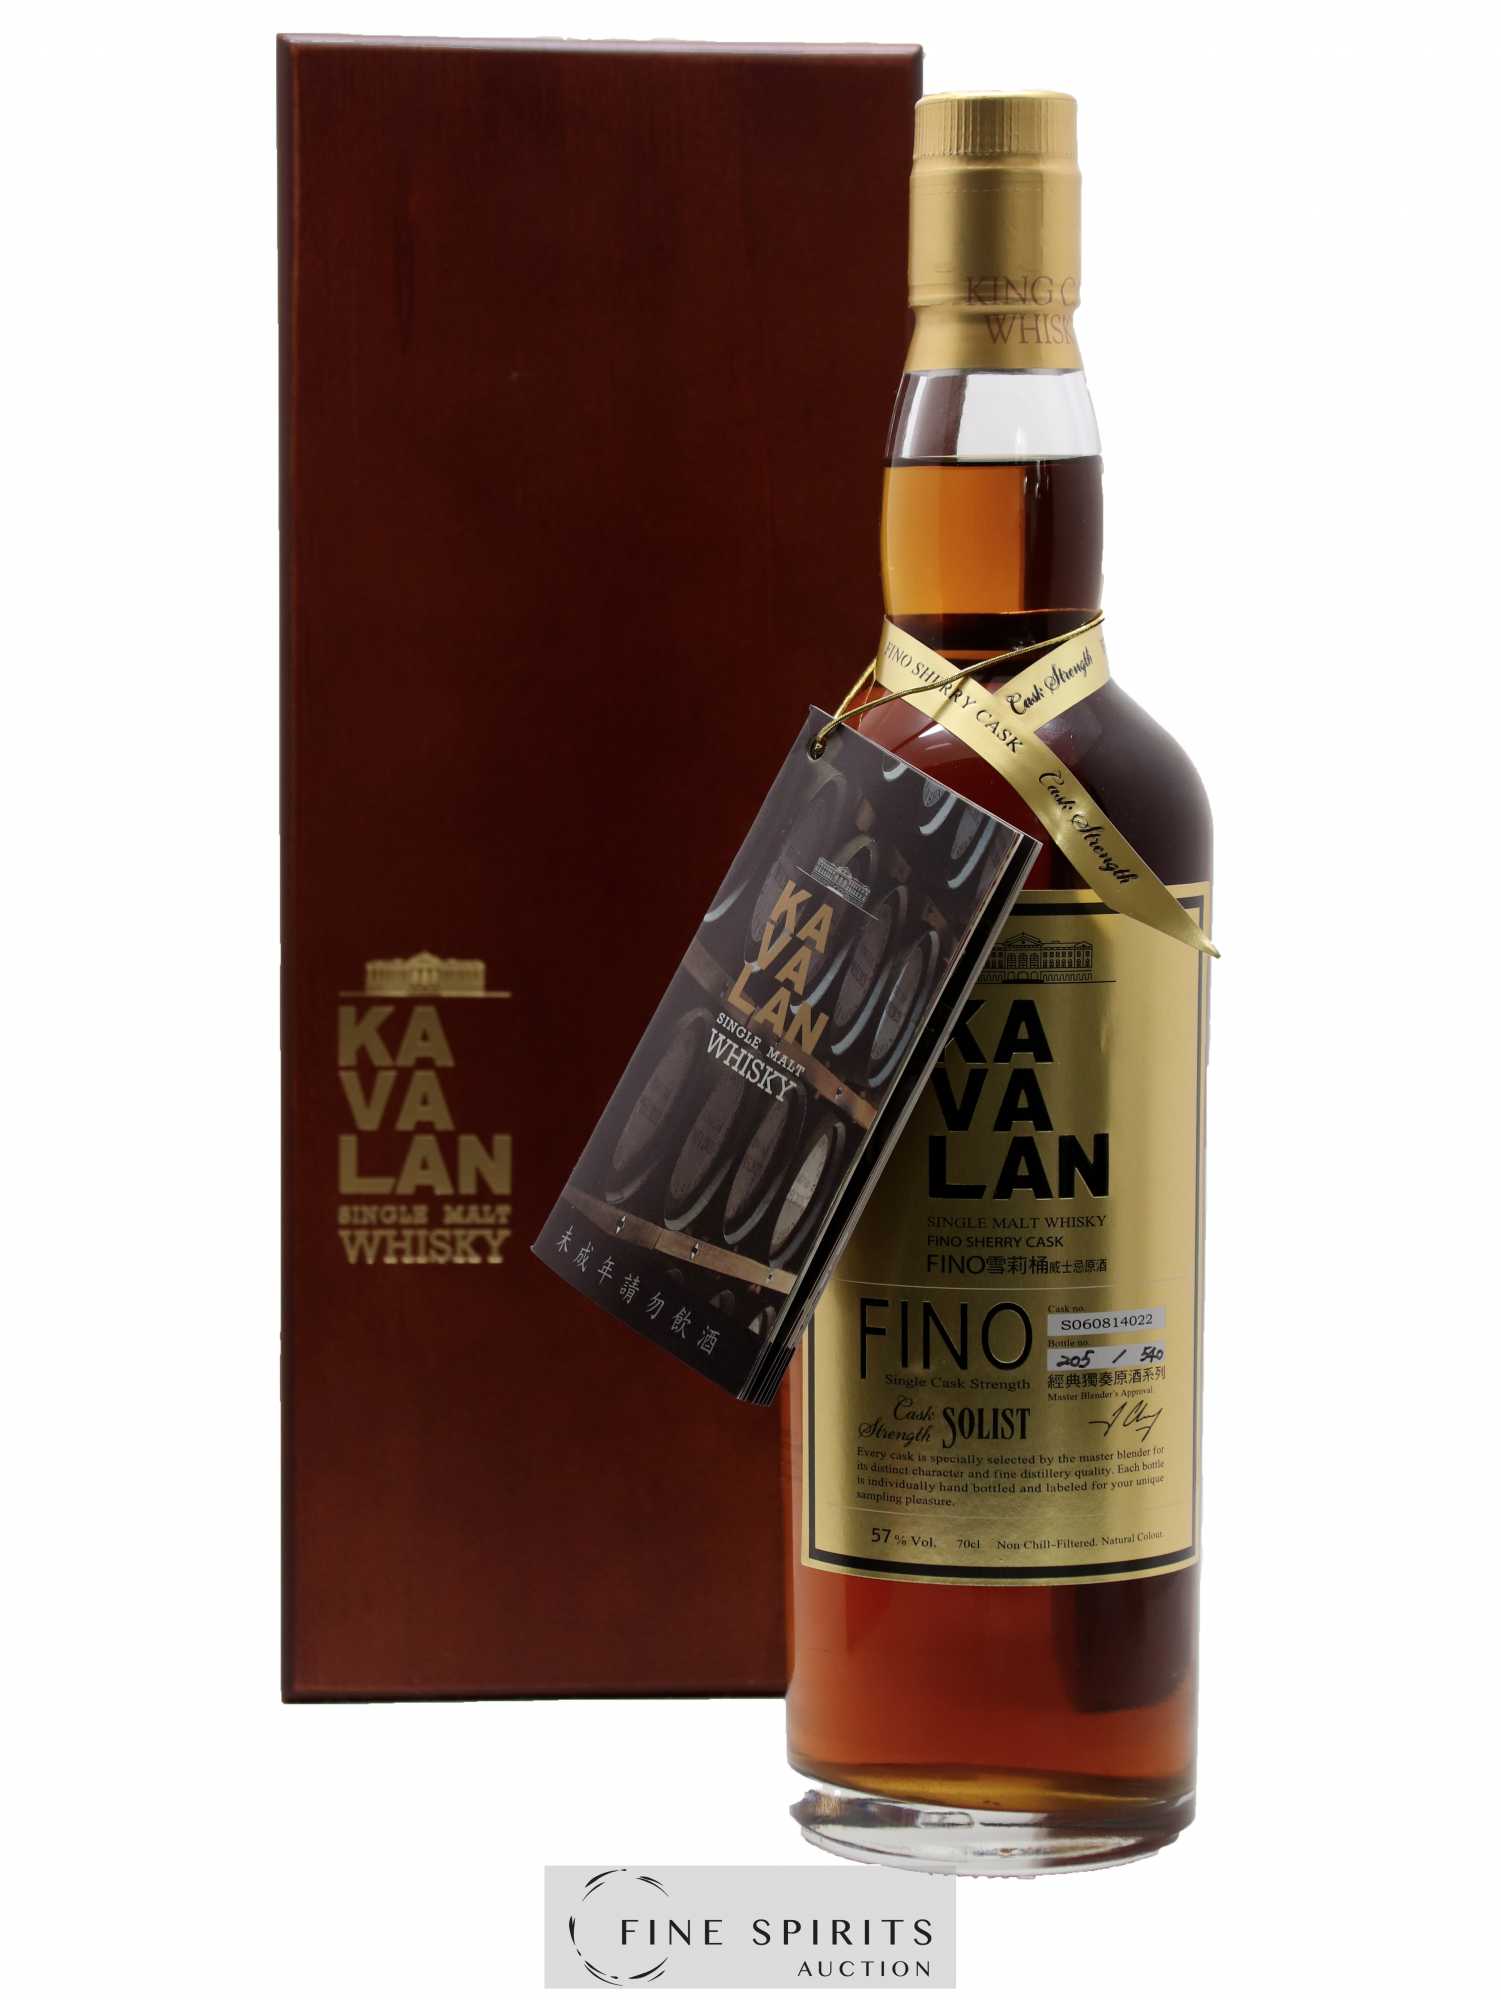 Kavalan Of. Solist Fino Sherry Cask n°S060814022 - One of 540 - bottled 2012 LMDW Cask Strength 